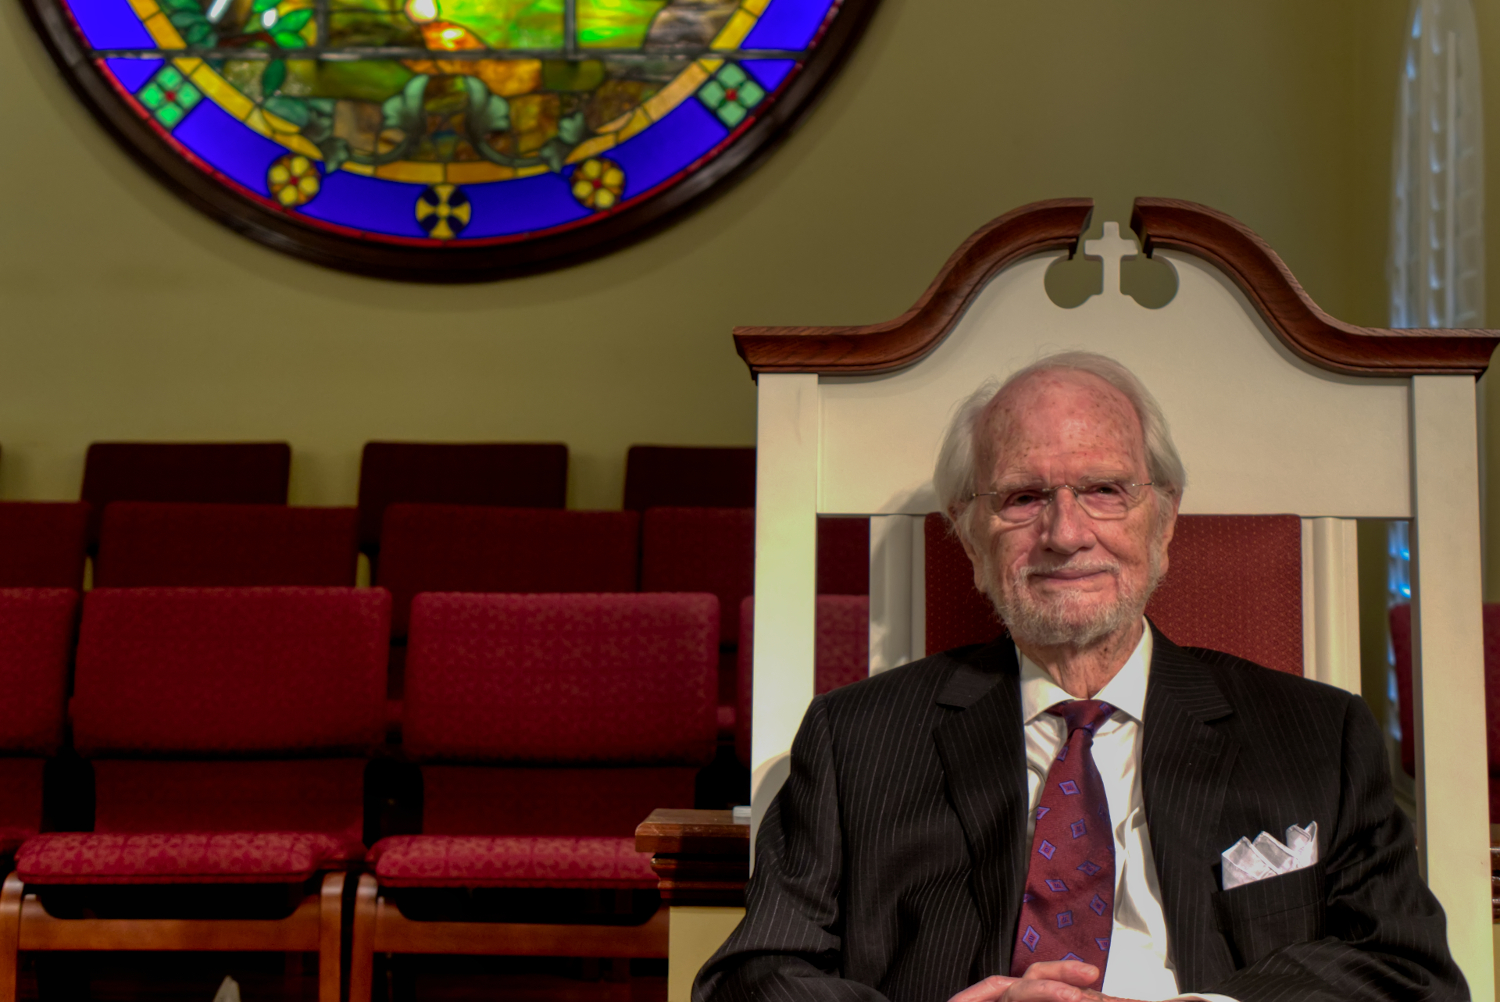 Dr. Jimmy Latimer sitting in front of stained glass